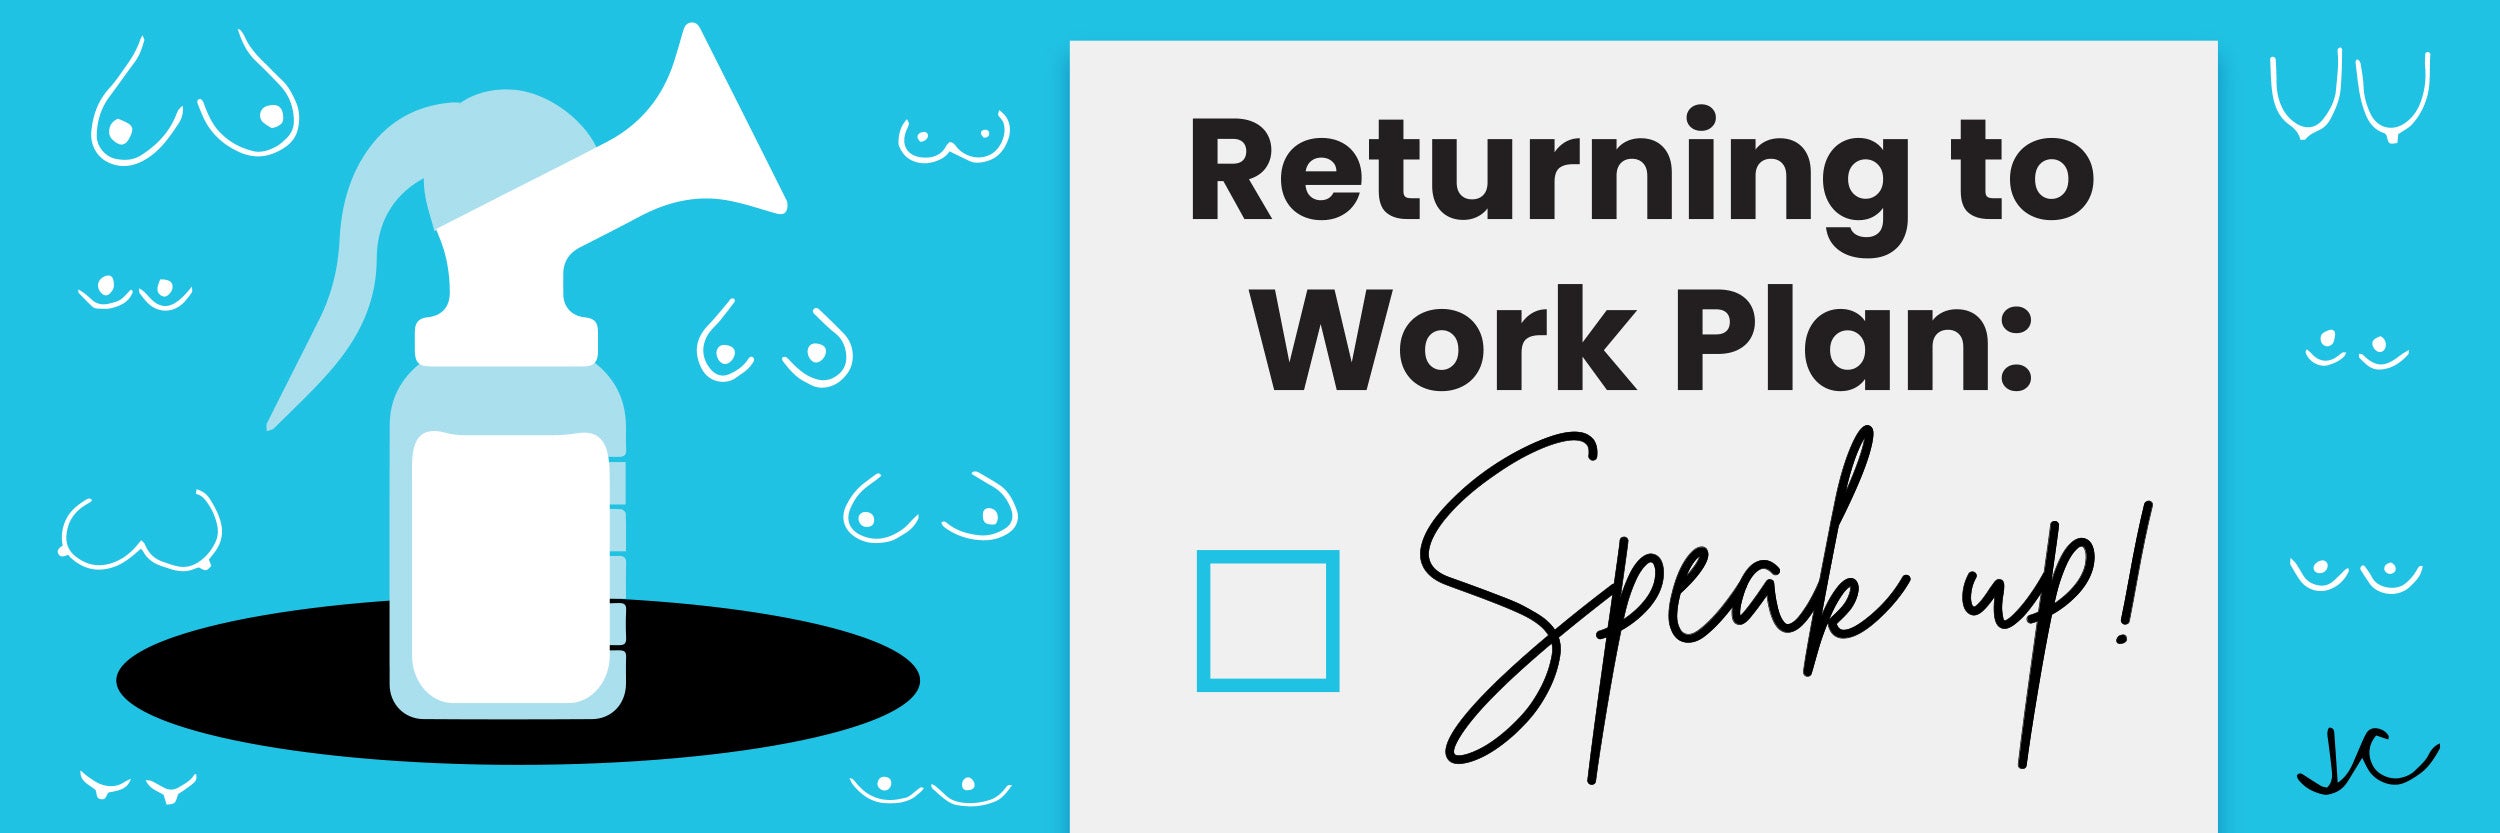 How to Talk to Your Employer About Returning to Work - Returning to work plan - Speak up